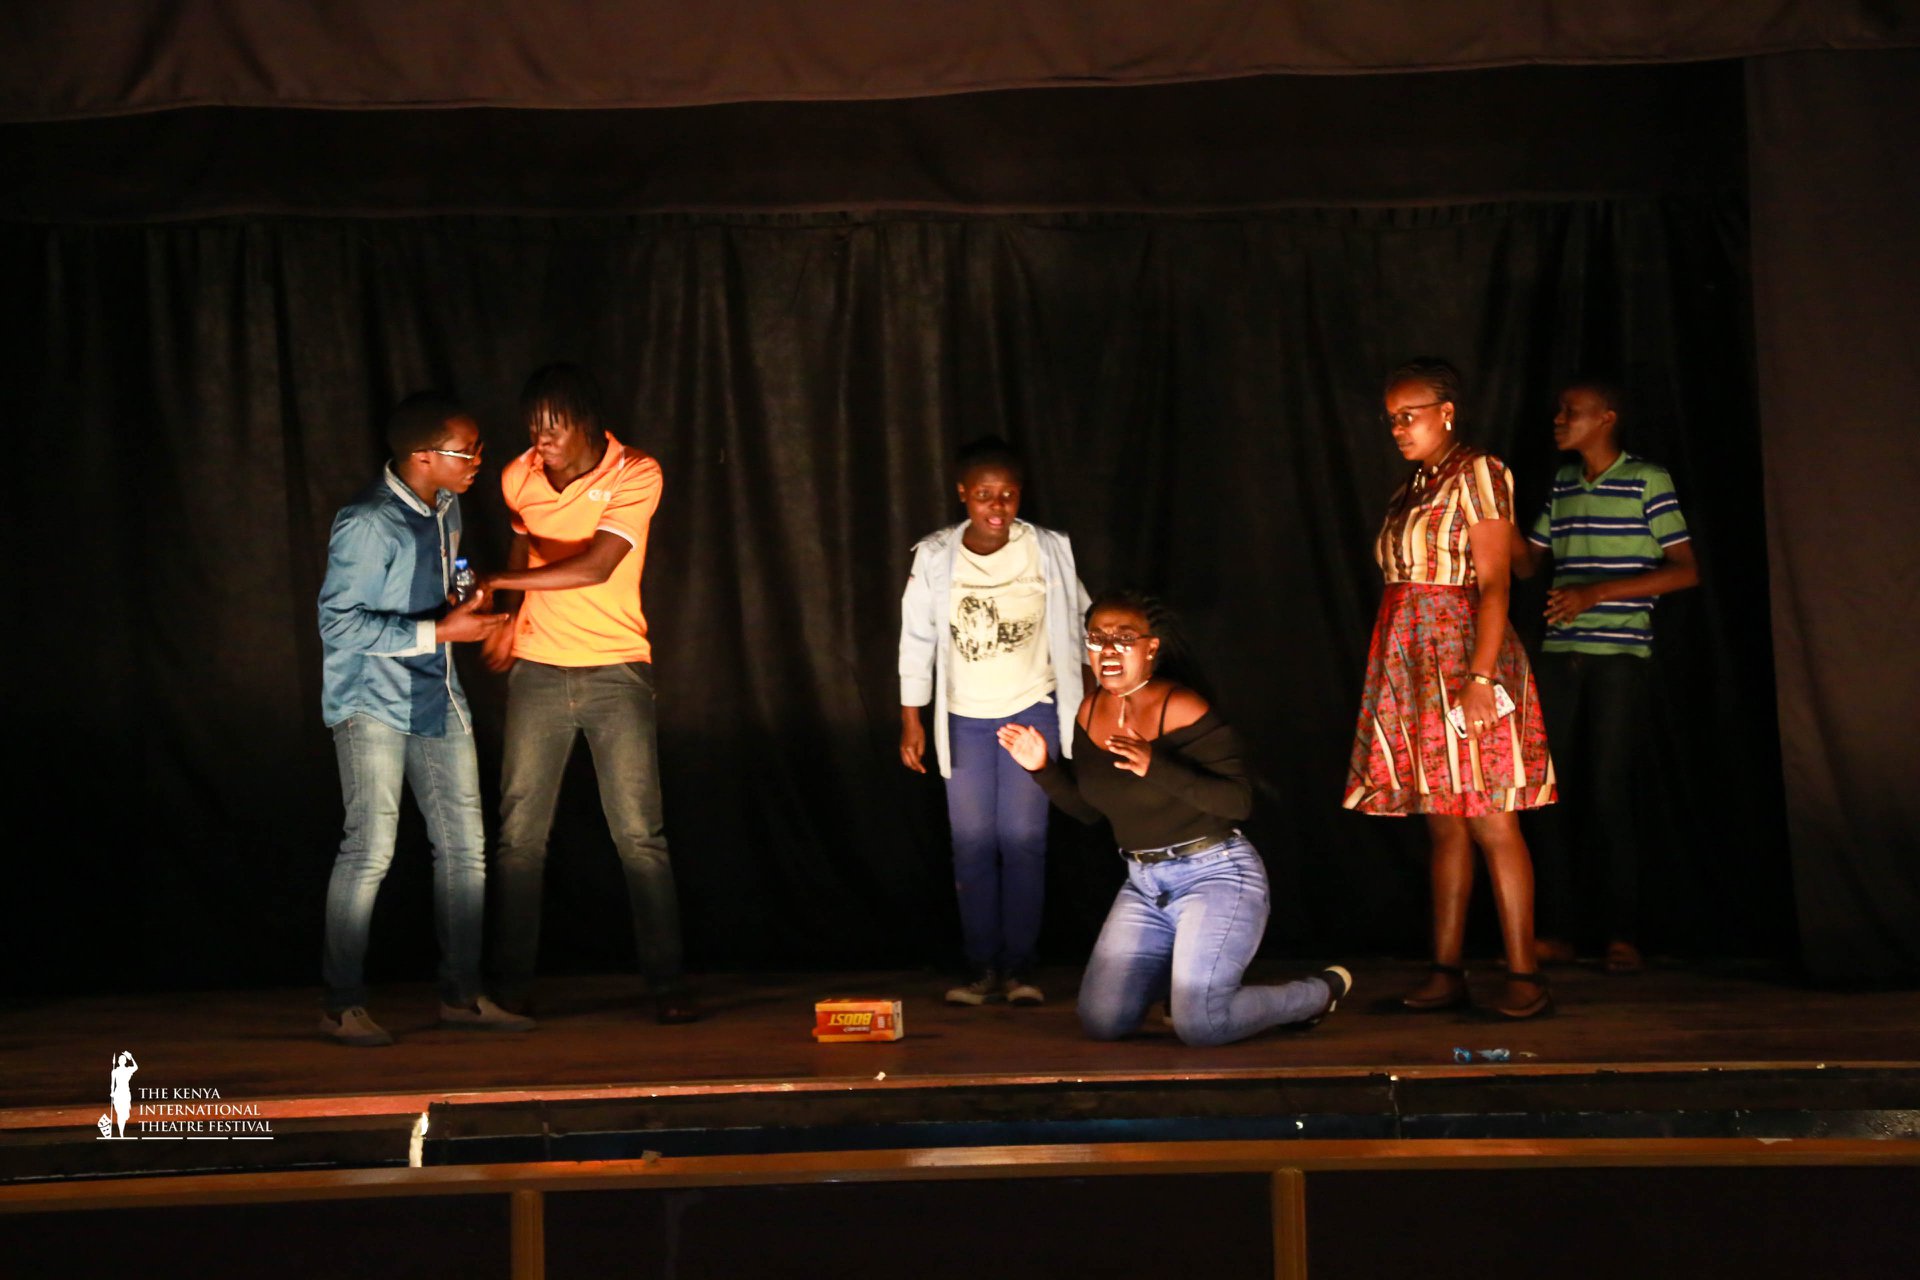 A past performance at the Nakuru Players Theatre. KTA jurists will assess performances across the country. (Photo: Kenya International Theatre Fest)